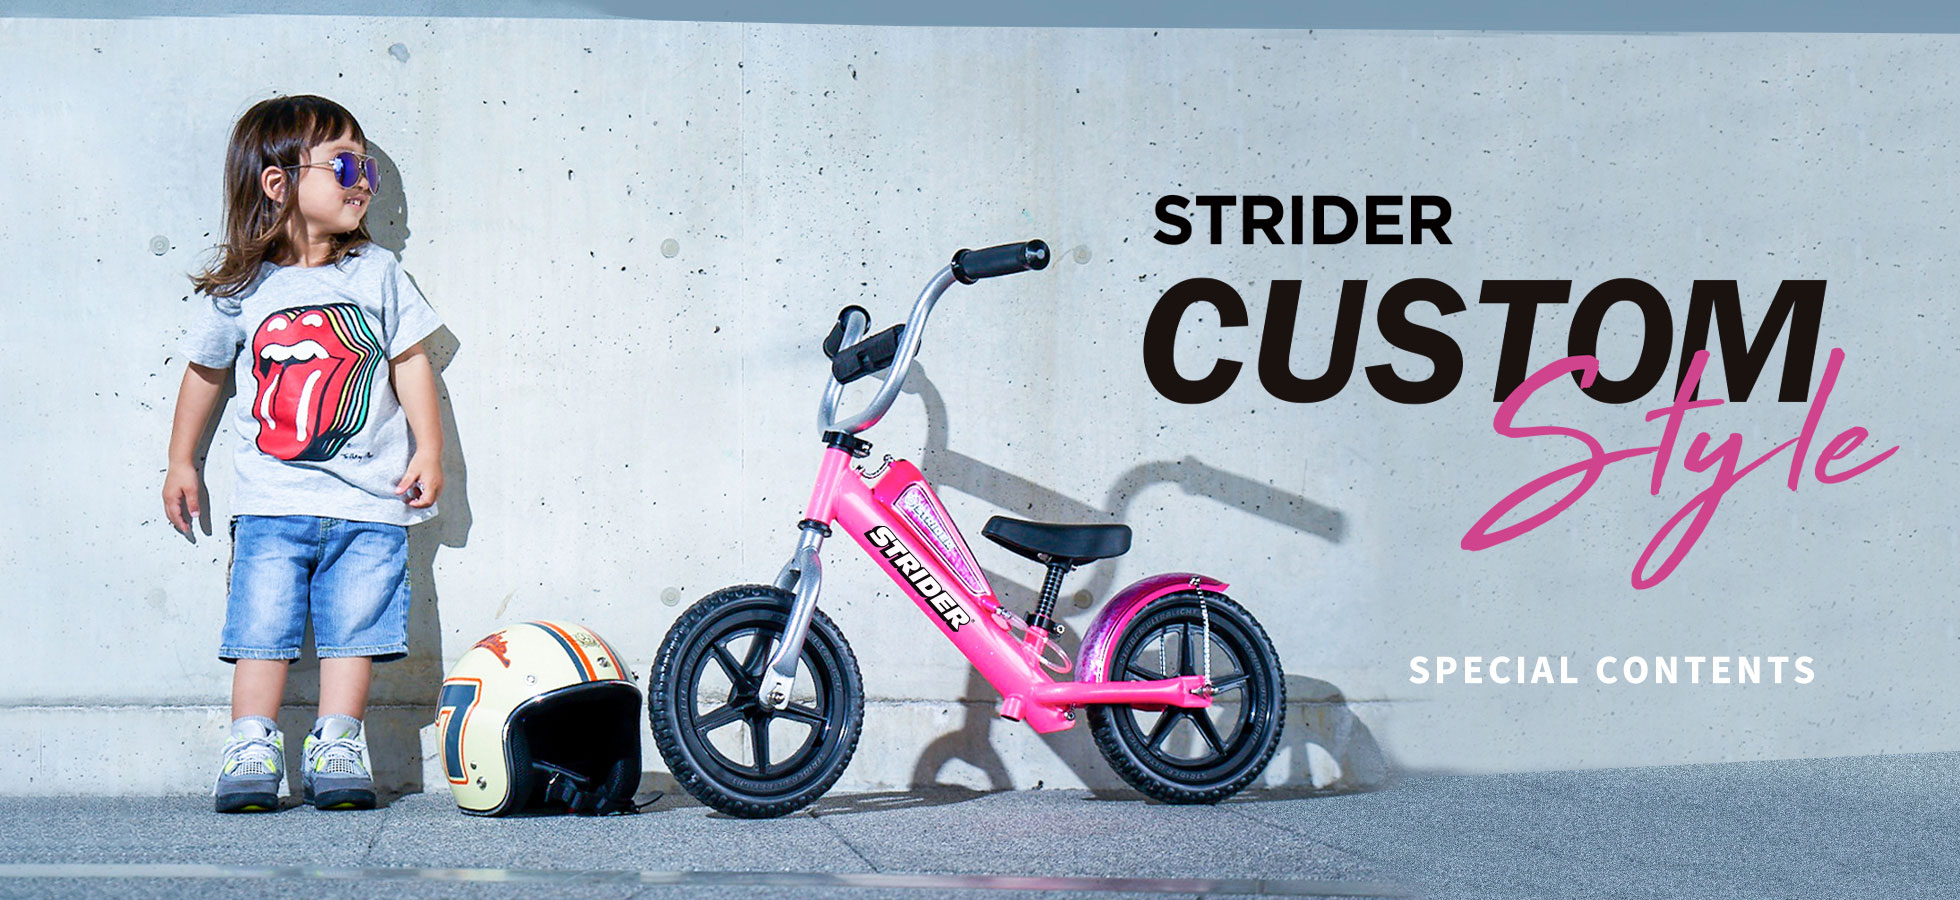 STRIDER CUSTOM Stylle SPECIAL CONTENTS